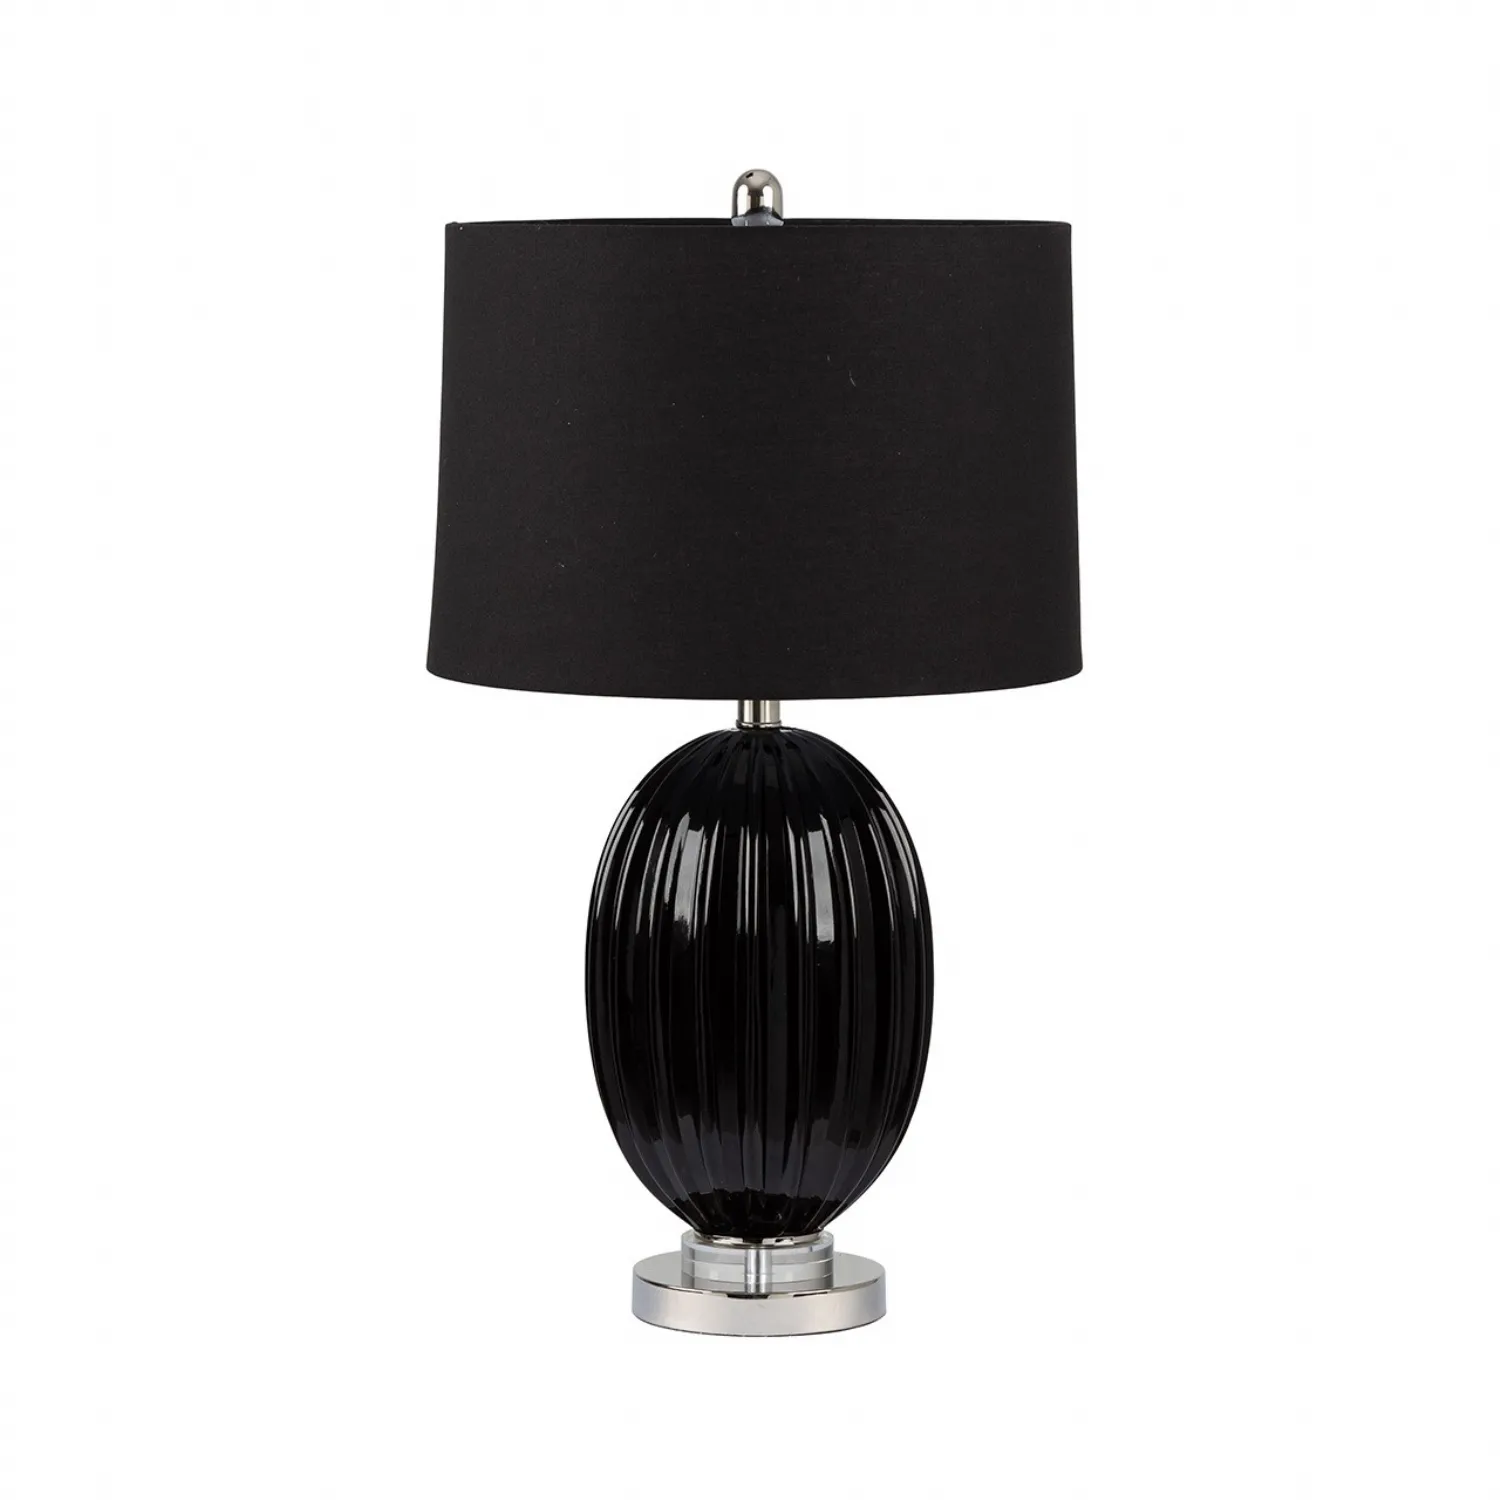 67. 3cm Ribbed Black Table Lamp With Black Linen Shade